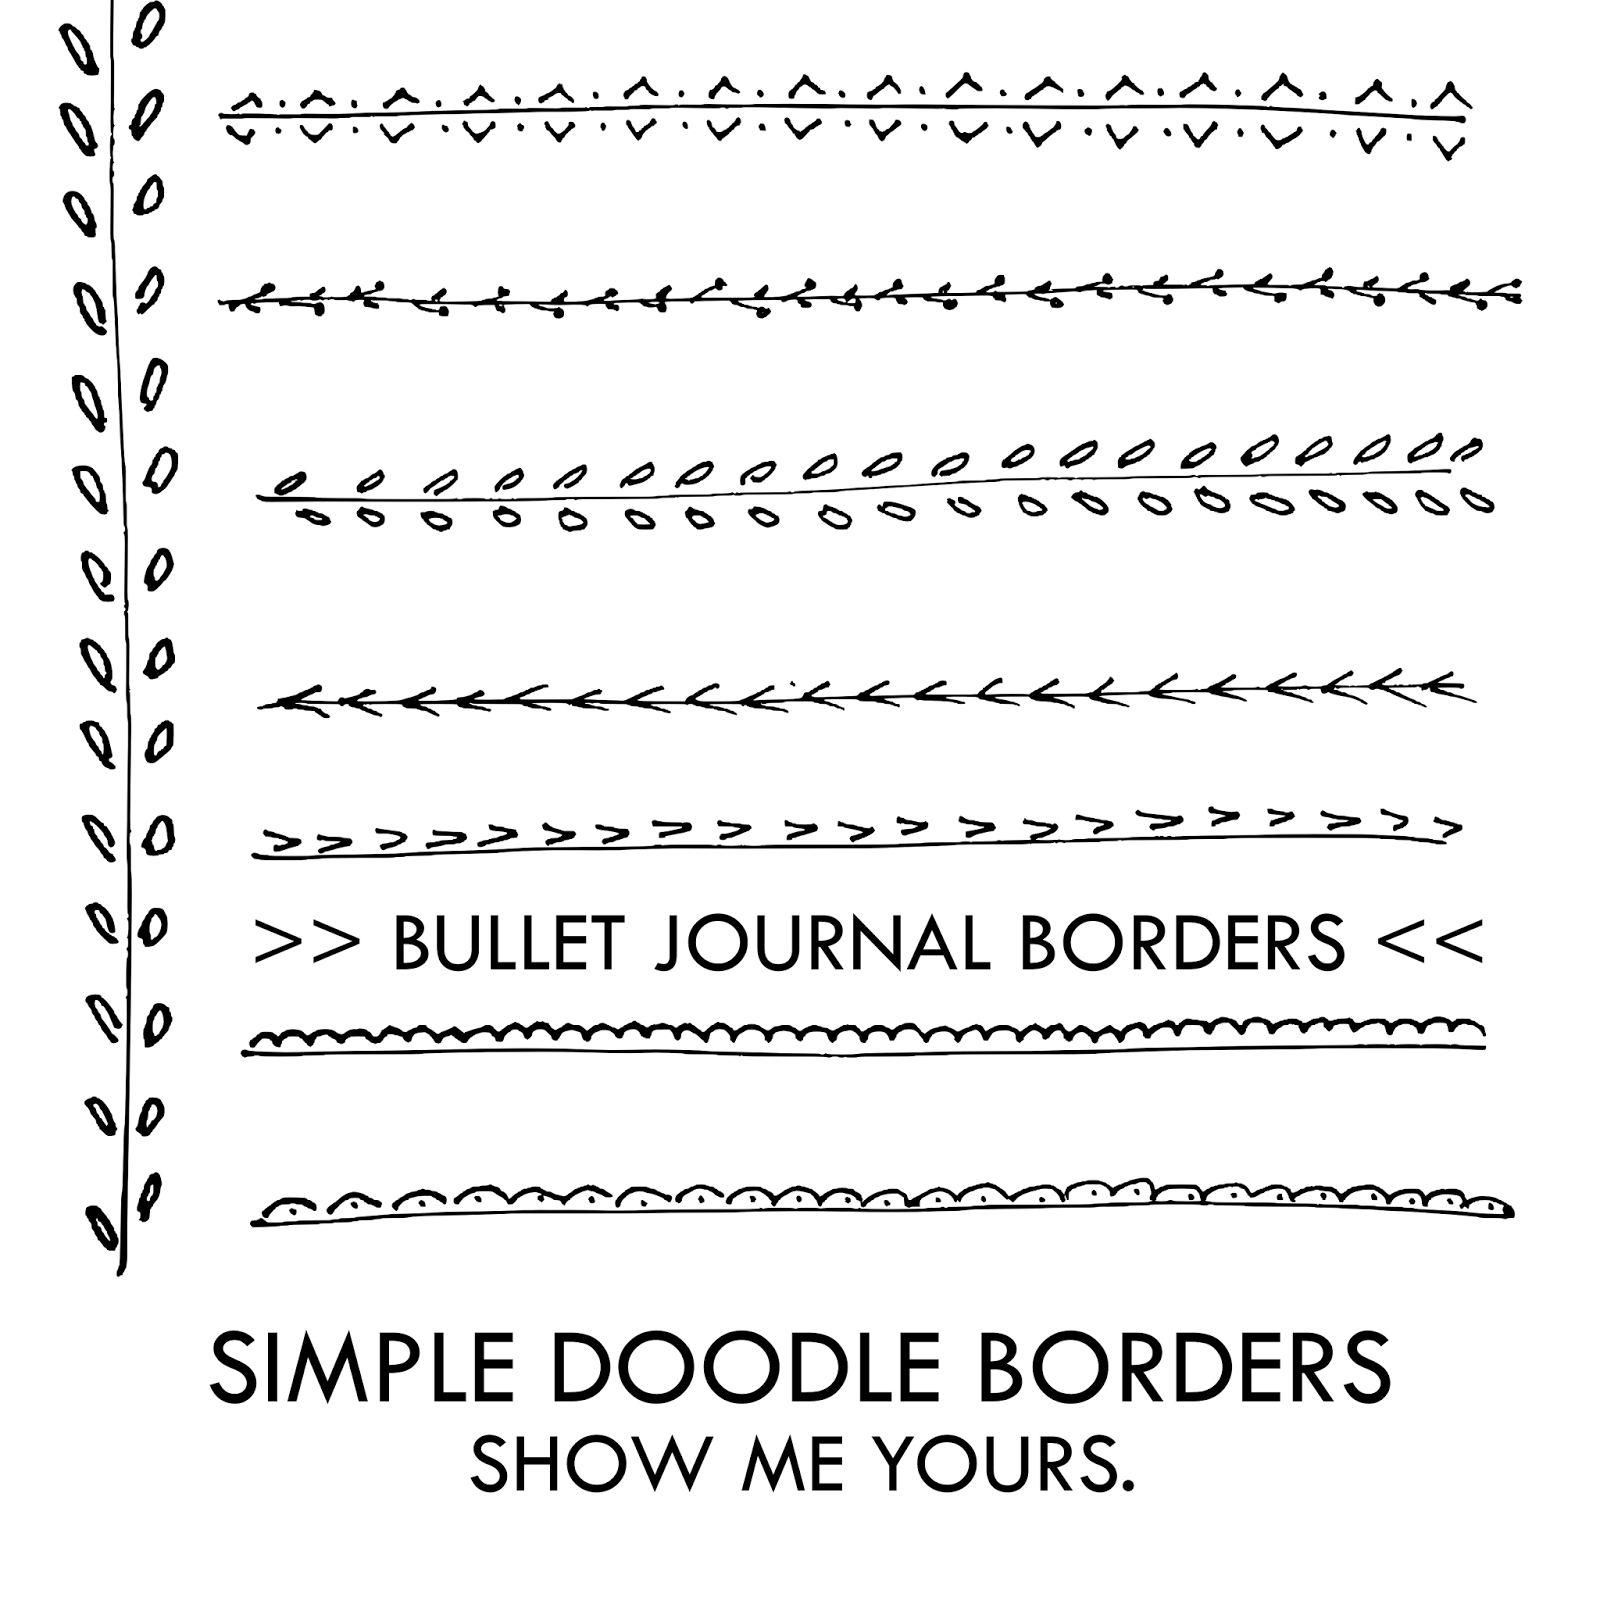 Free Printable Bullet Journal Templates + 2018 Calendar - Mini - Bullet Journal Stickers Free Printable Black And White